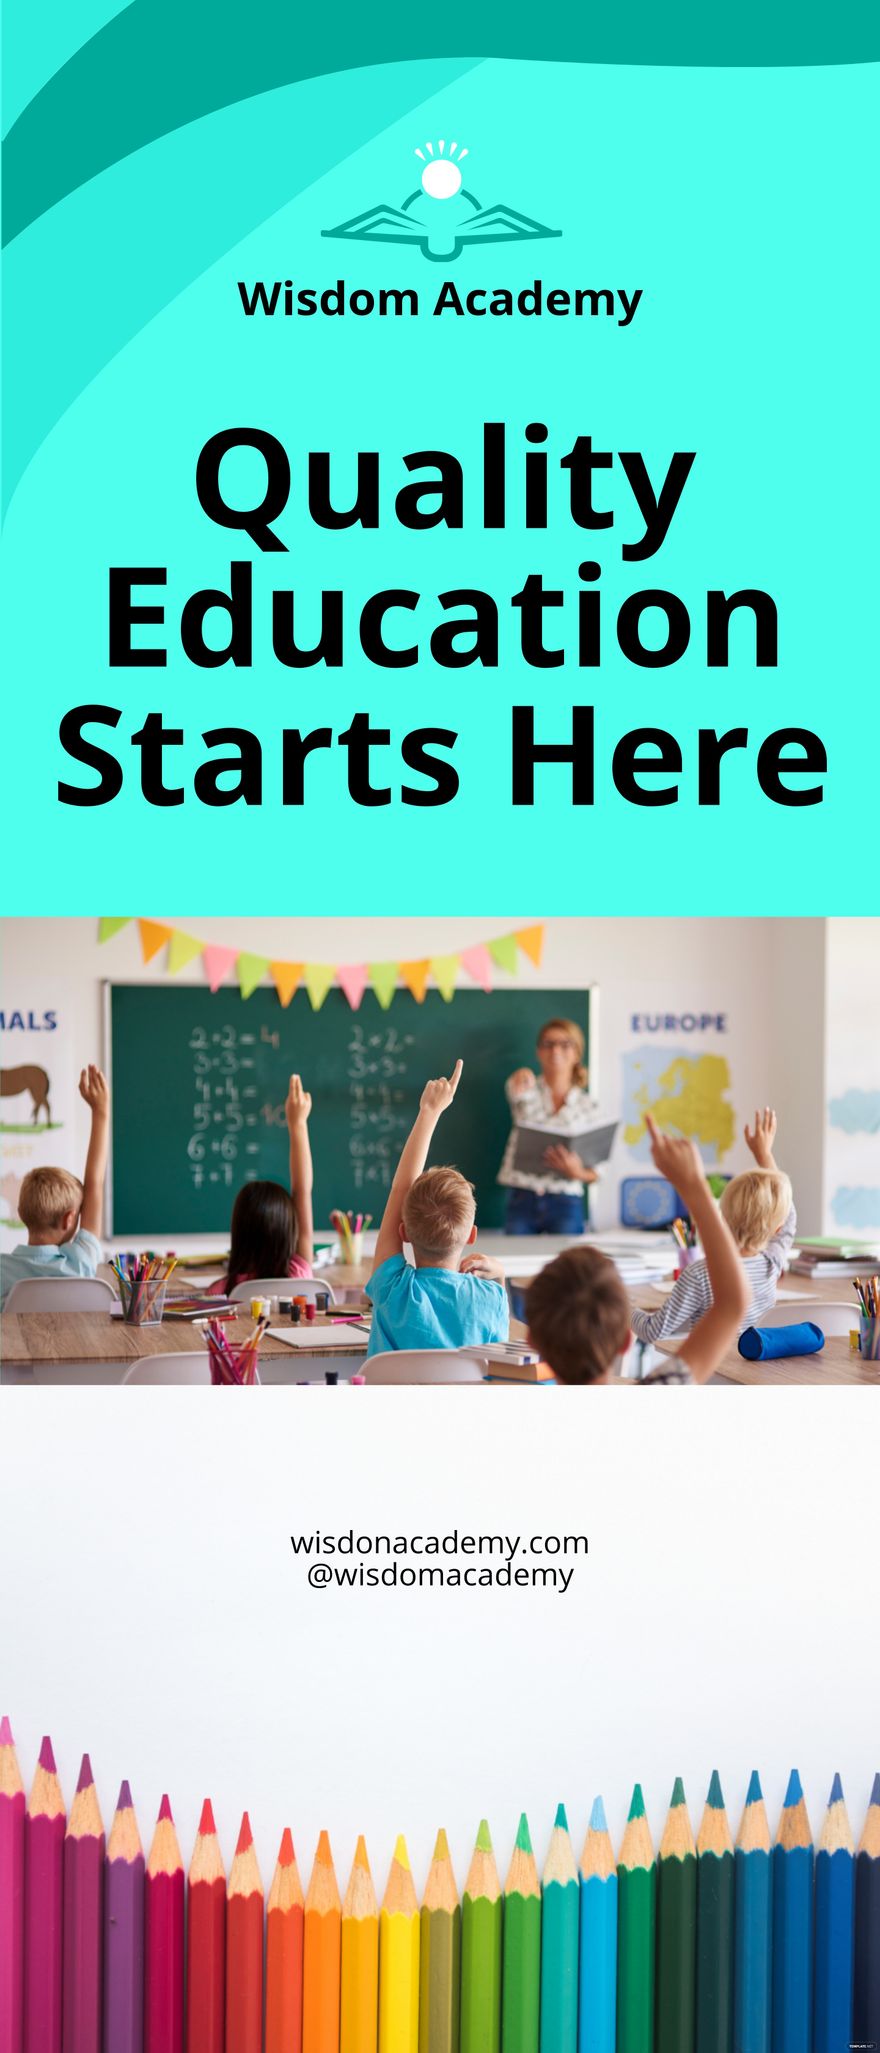 Back To School Rollup Banner Template in Word, Google Docs, Apple Pages, Publisher